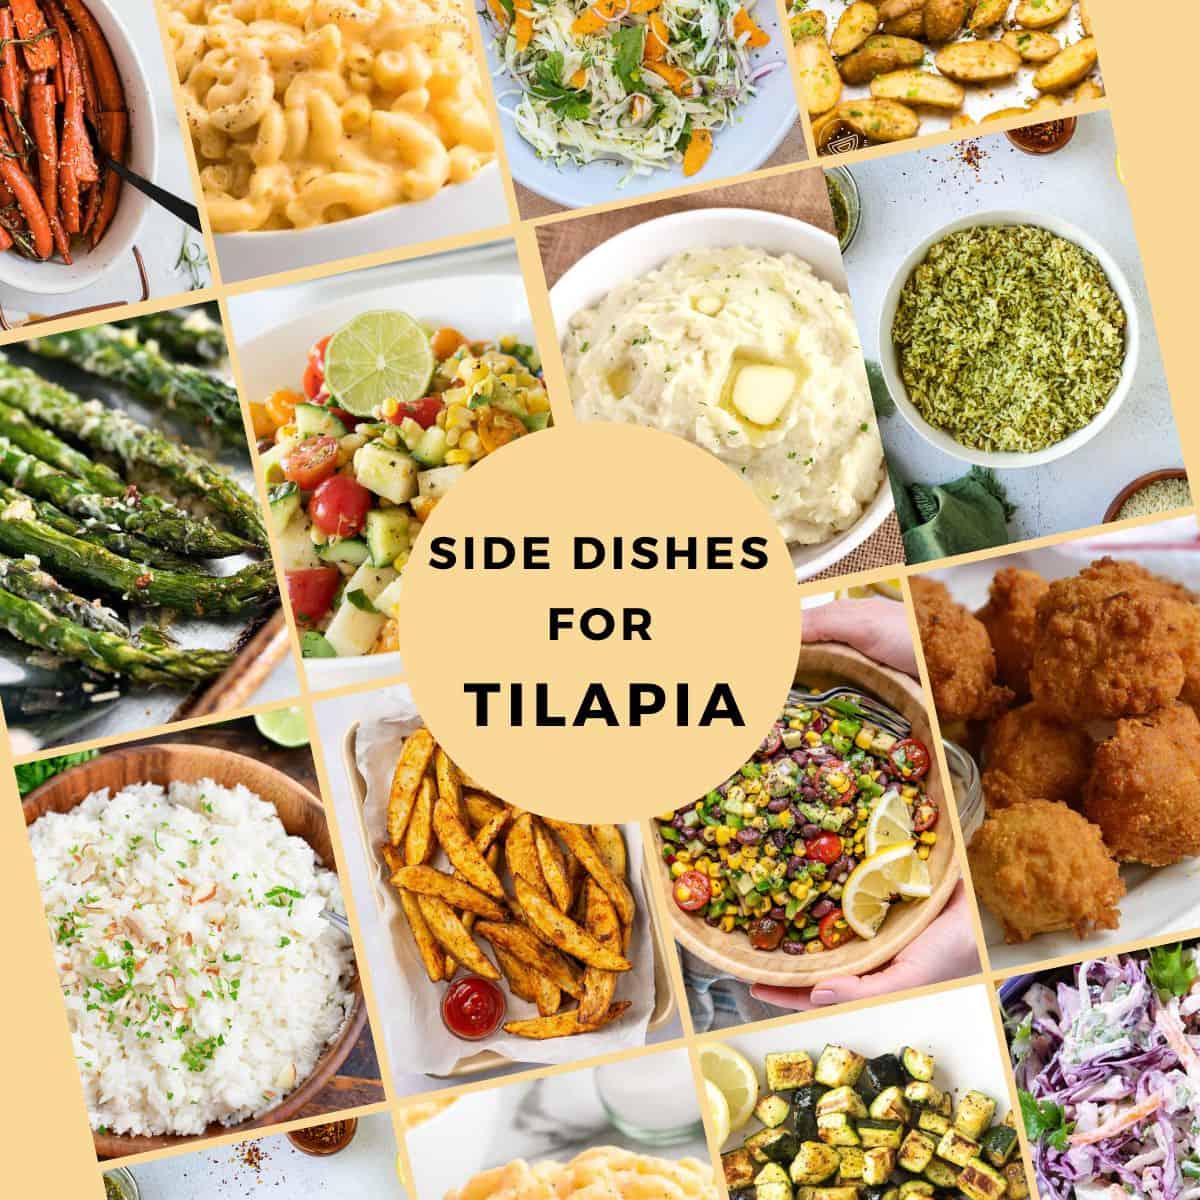 A collection of images of side dishes for tilapia. Multiple tilapia sides include vegetables, salad, slaw, and potatoes.